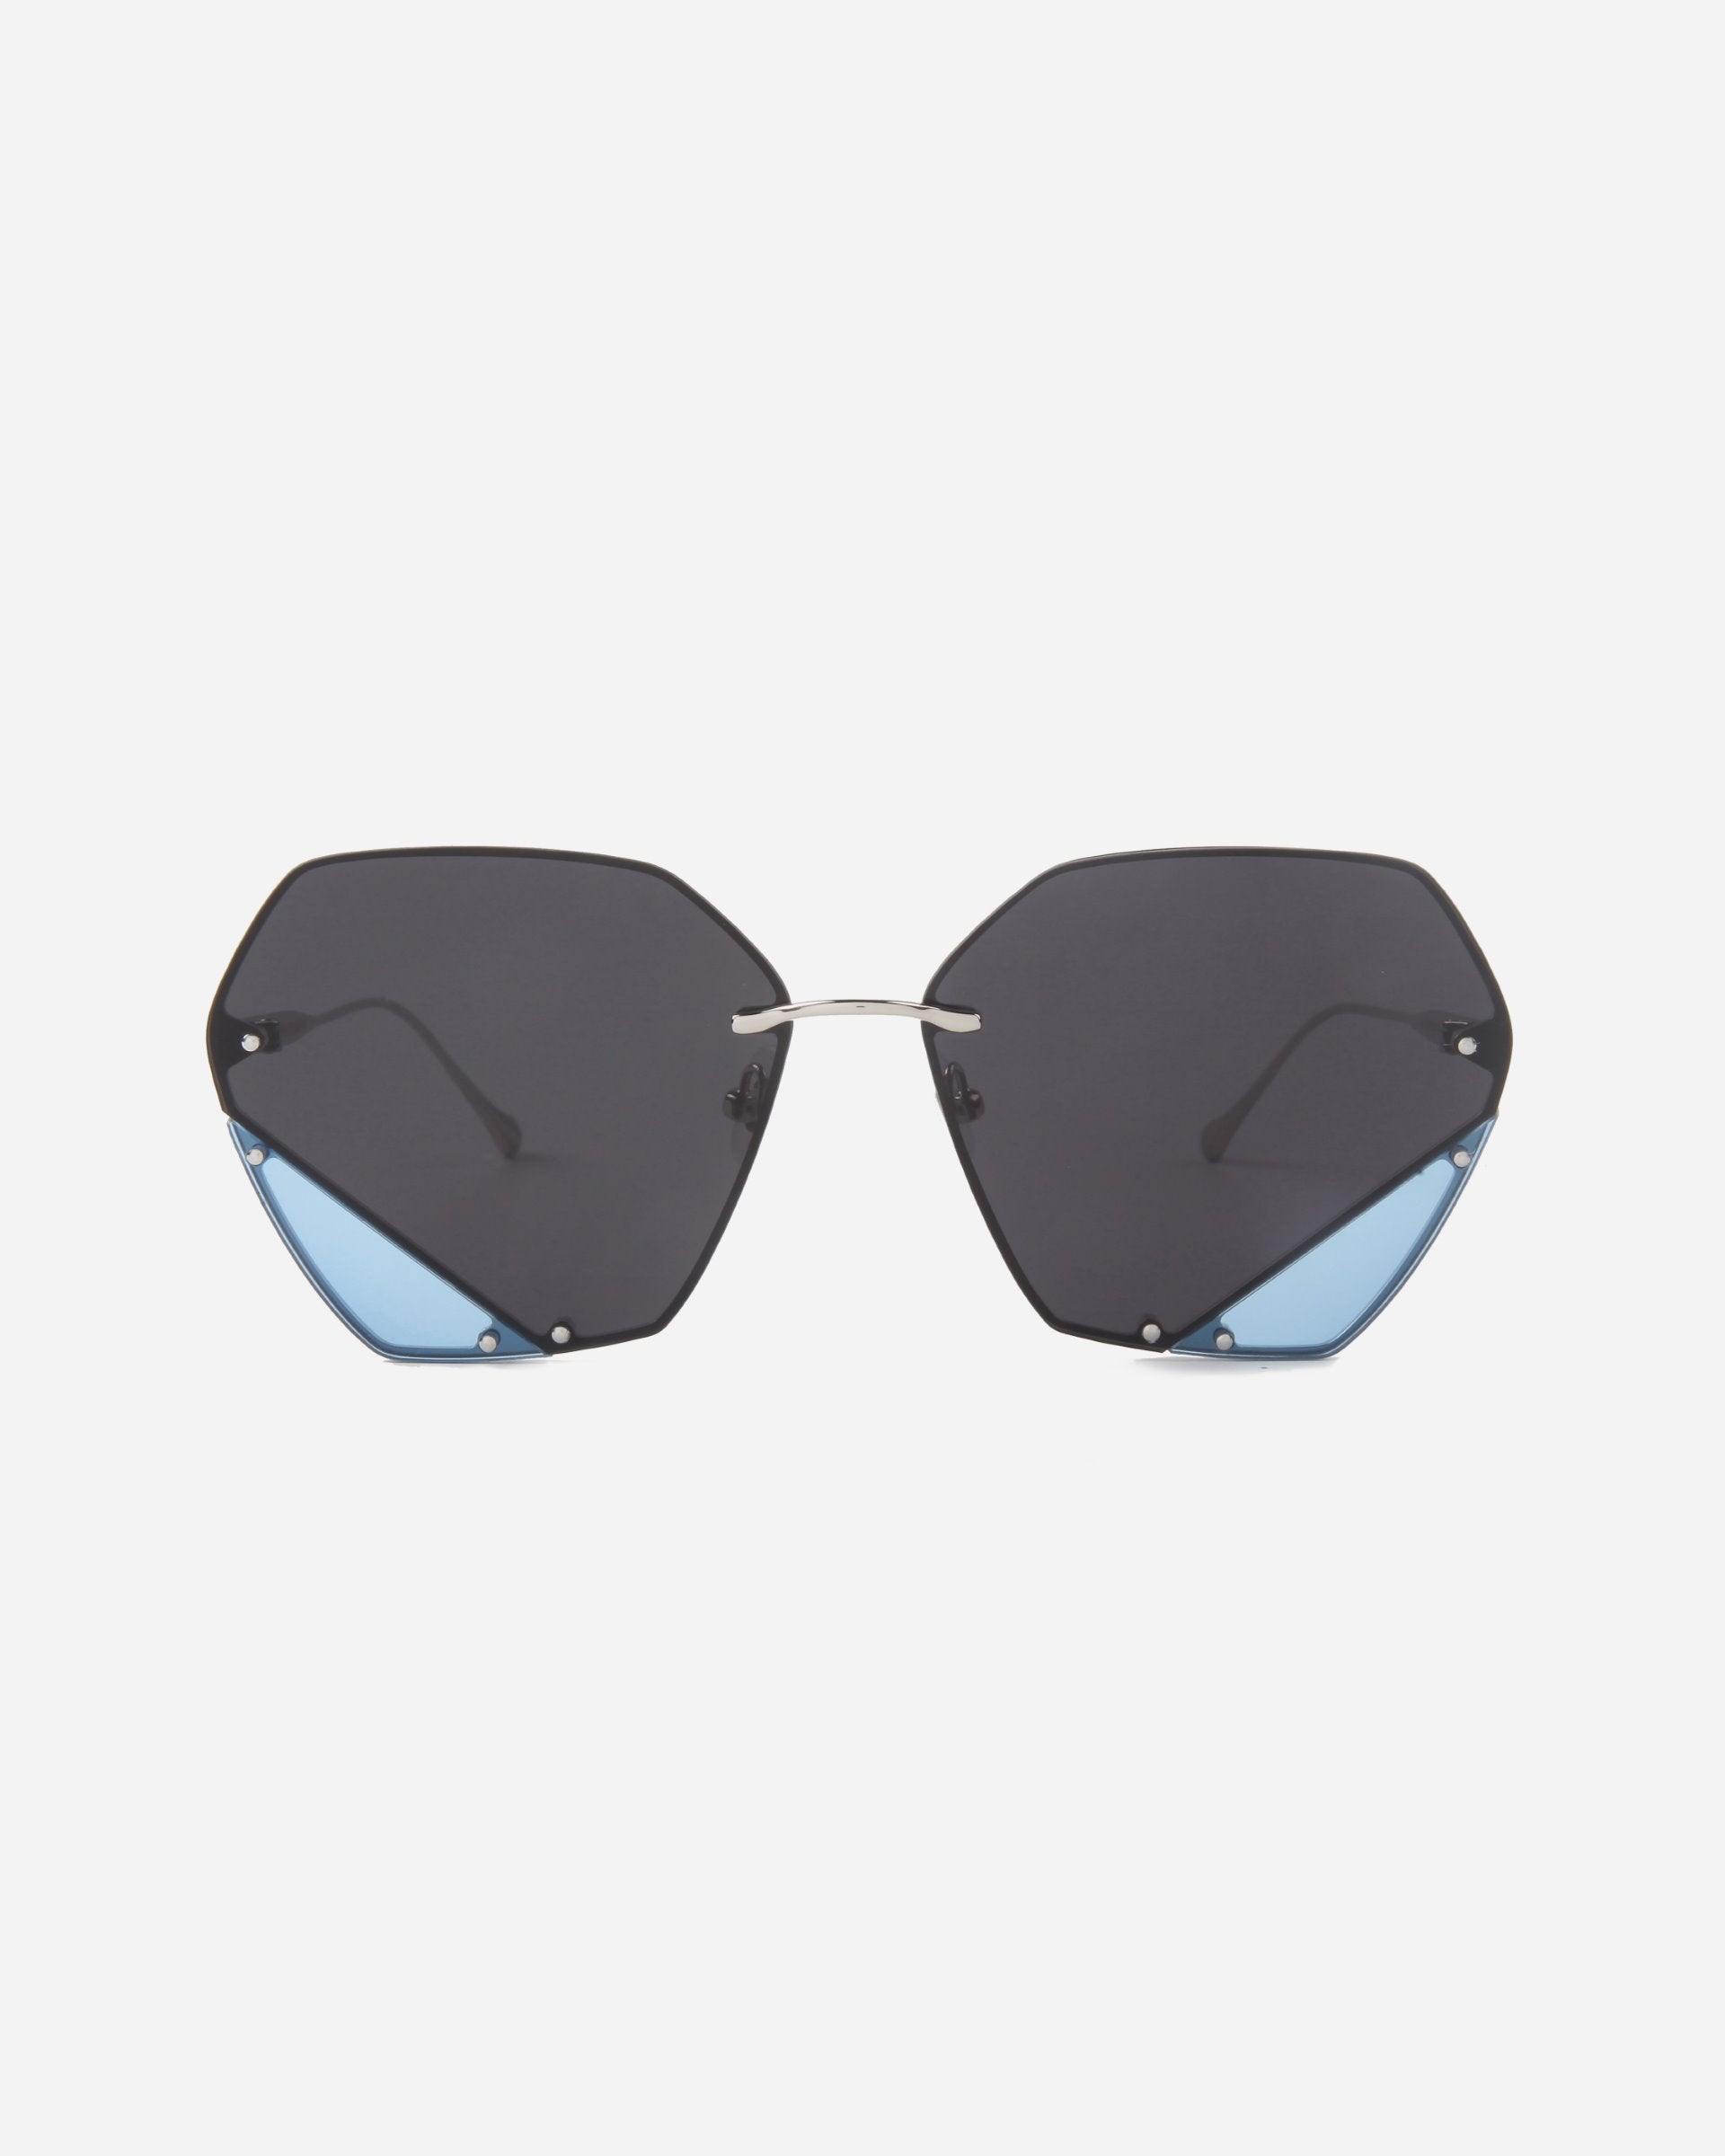 A pair of sunglasses featuring uniquely shaped, geometric lenses with angular cuts and a hint of light blue tint at the lower corners. The bridge is minimalistic and silver-toned, complemented by jadestone nosepads, with no visible frame around the lenses. The product is Icy by For Art&#39;s Sake®. The background is white.